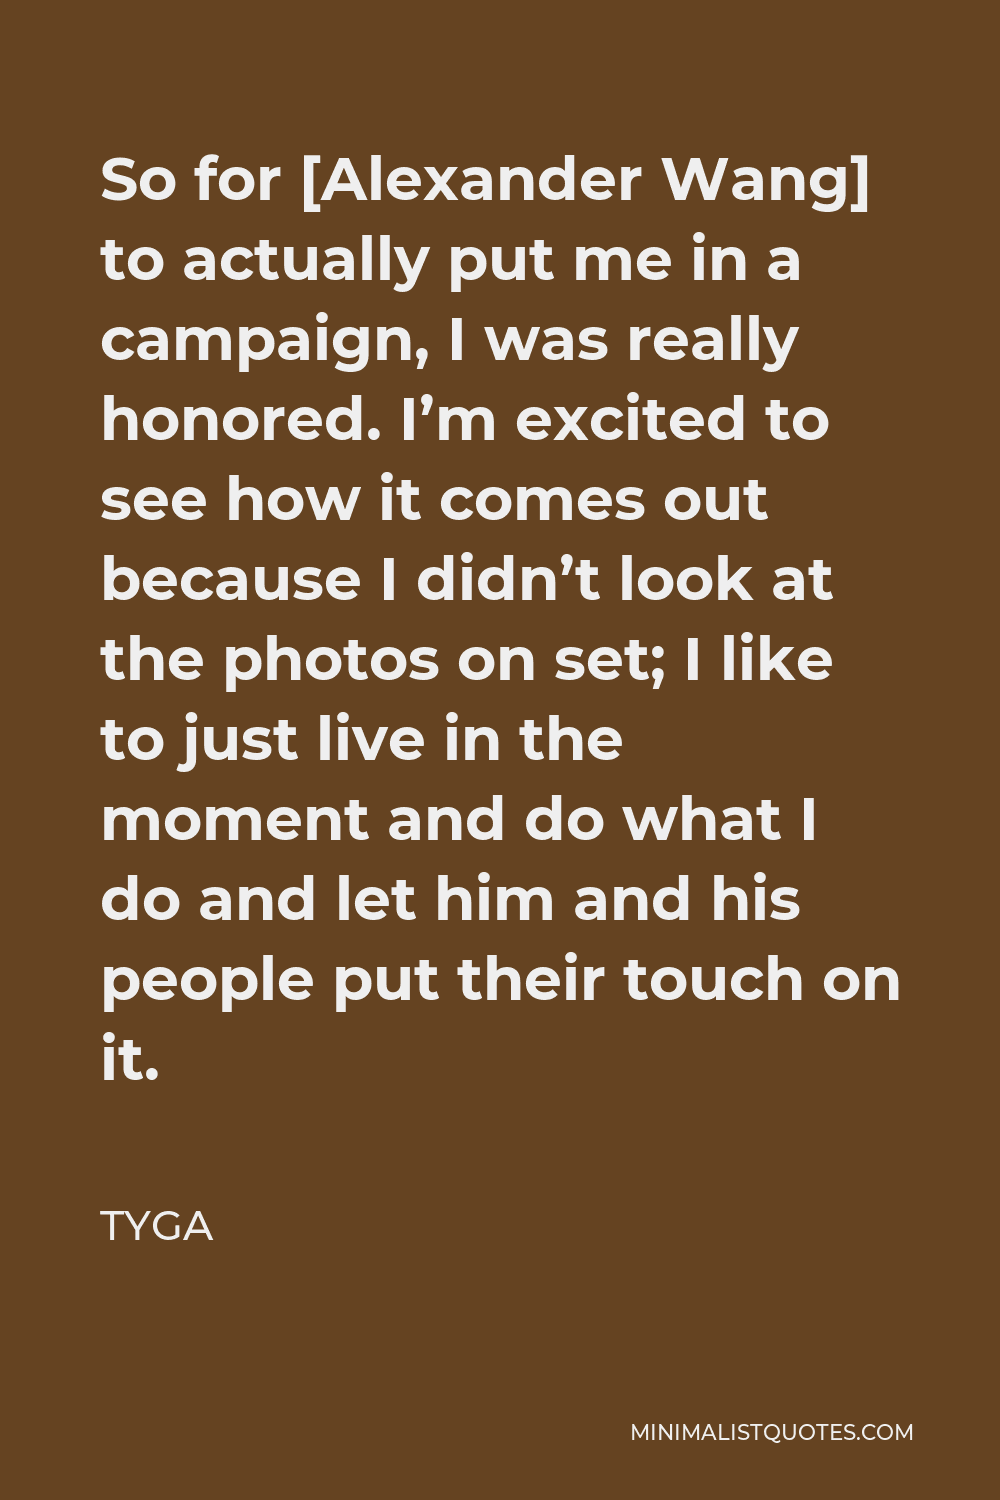 Tyga Quote - So for [Alexander Wang] to actually put me in a campaign, I was really honored. I’m excited to see how it comes out because I didn’t look at the photos on set; I like to just live in the moment and do what I do and let him and his people put their touch on it.